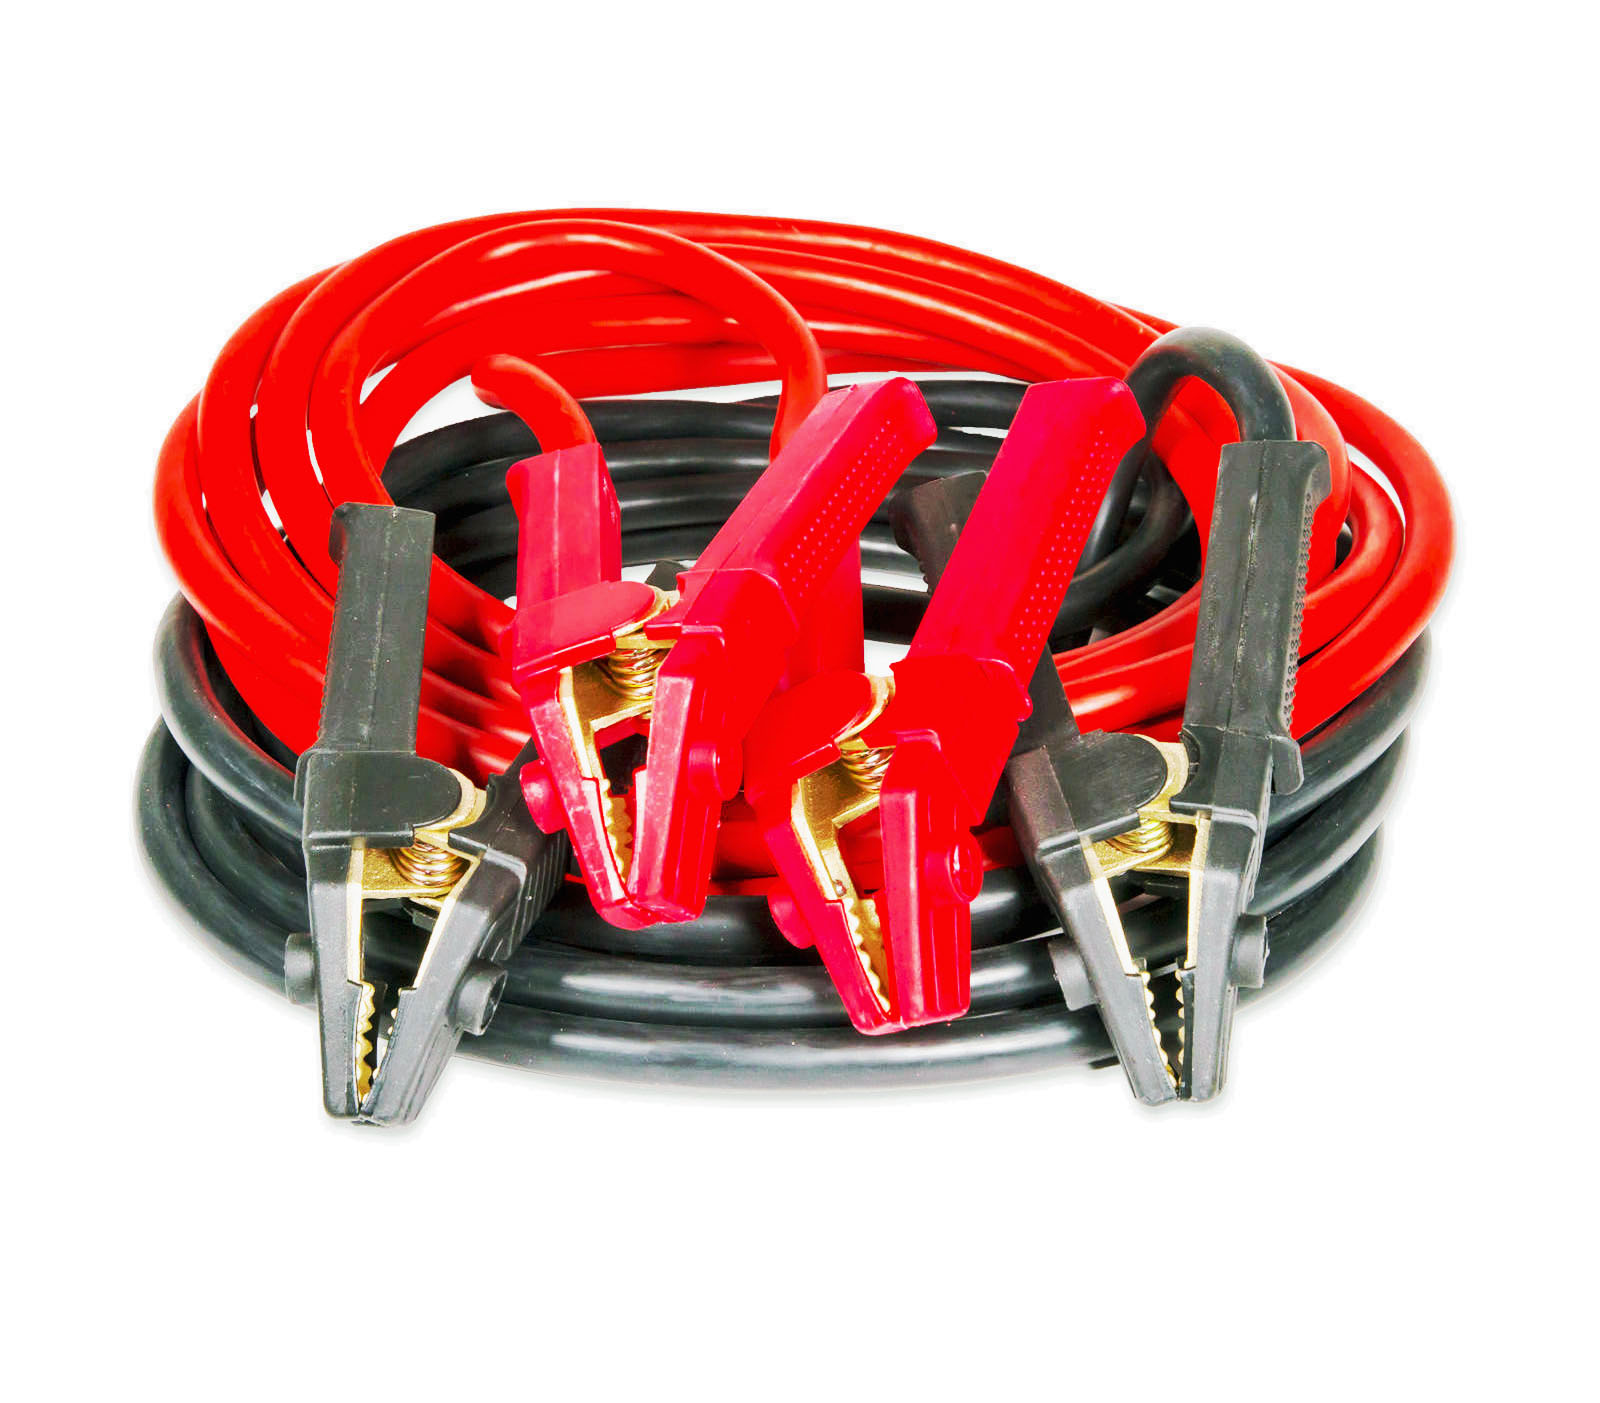 ▷ Jumper cable 6m length max. 1200A - available here! | Nakatanenga  4x4-Equipment for Land Rover, Offroad & Outdoor